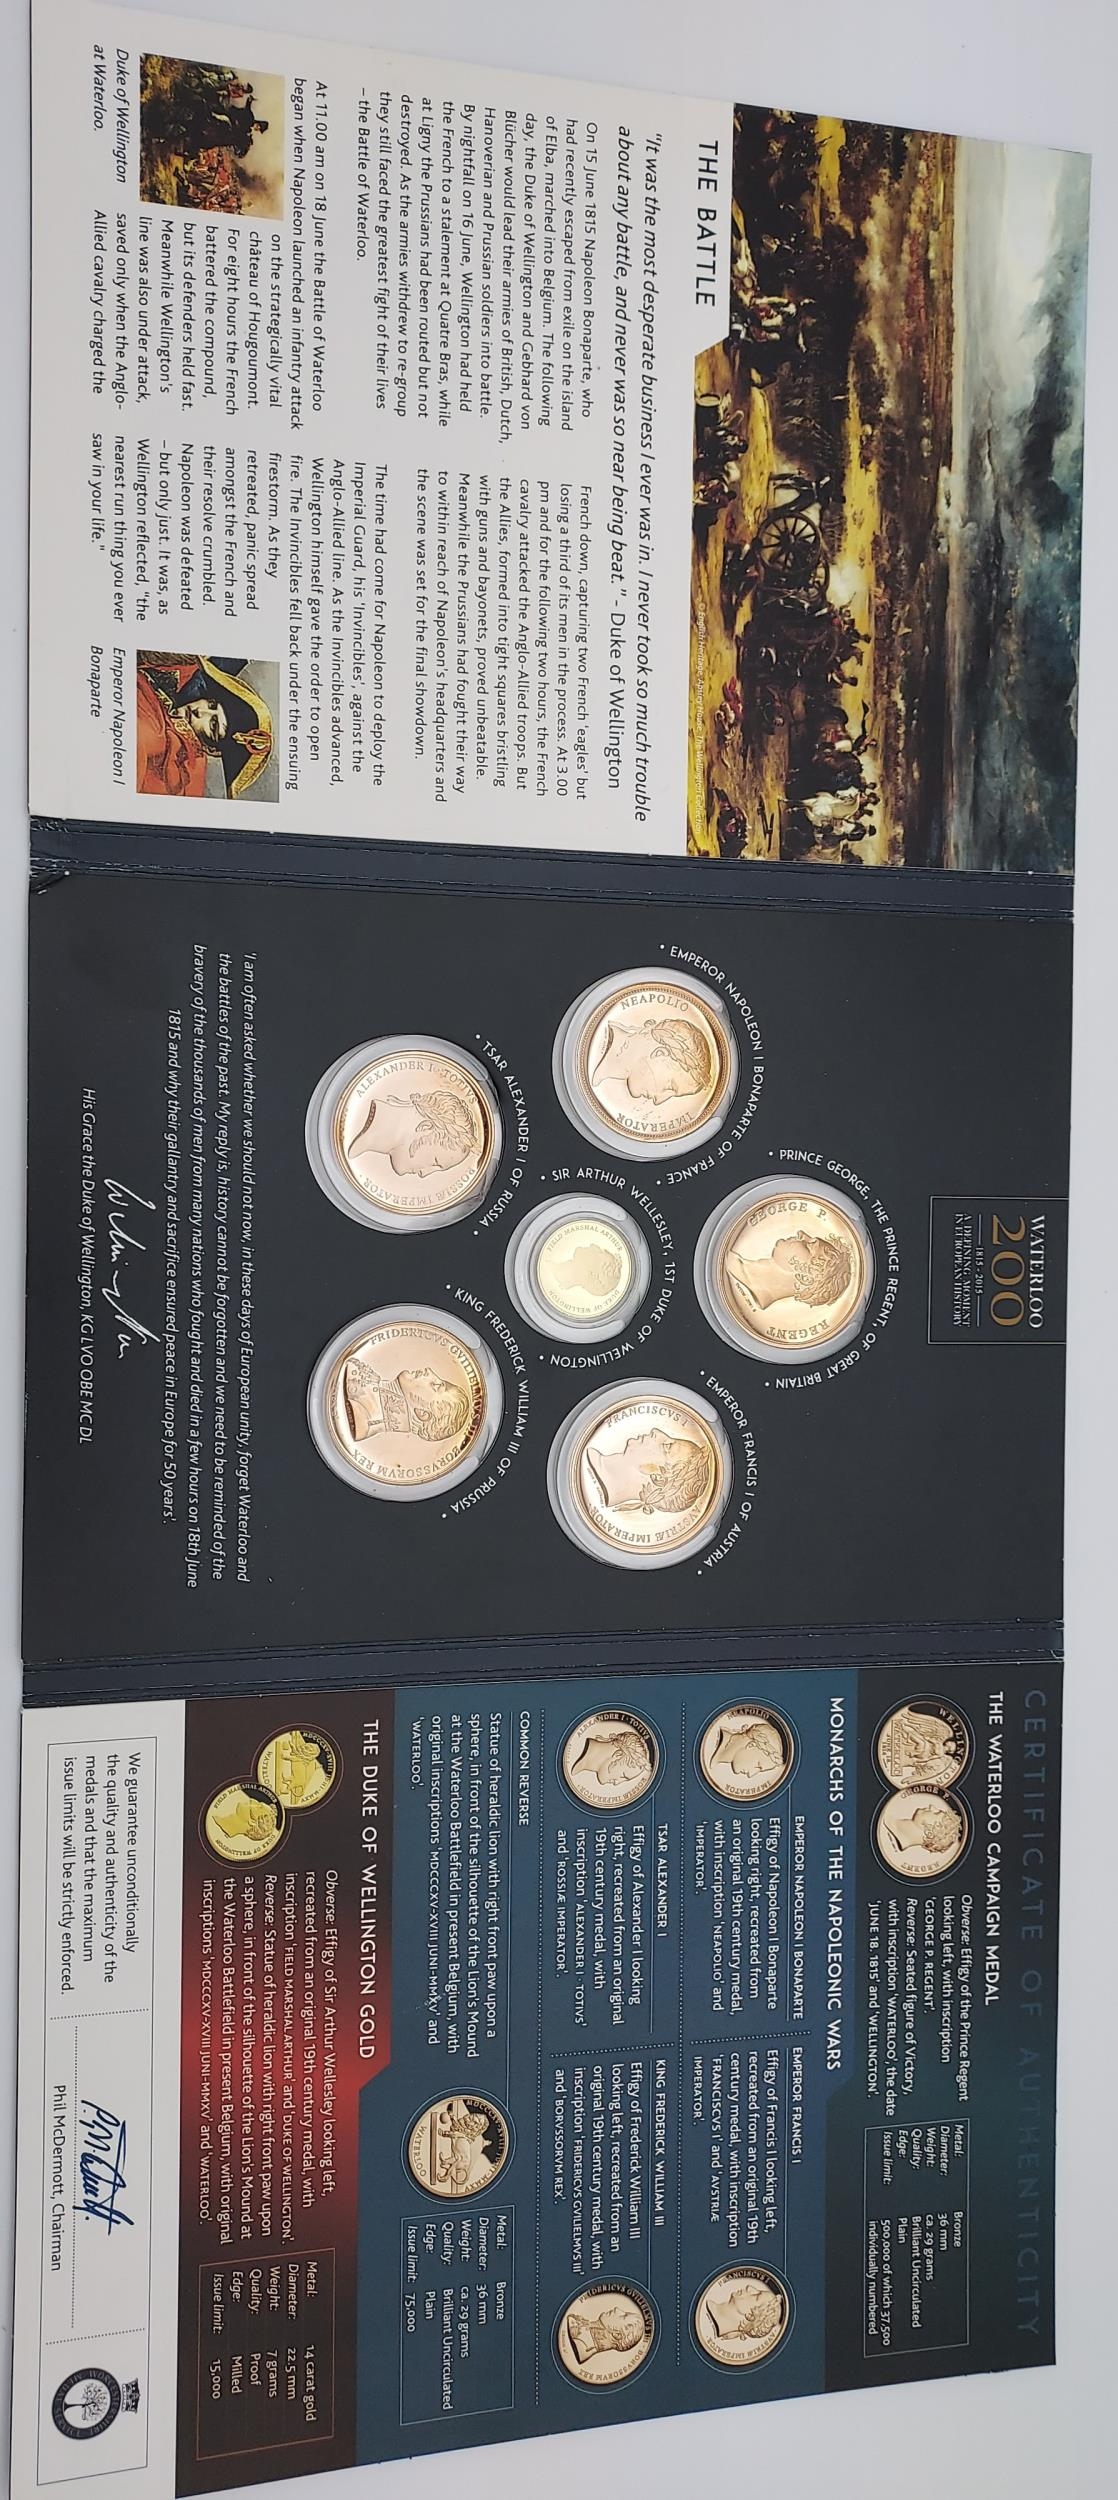 The Battle of Waterloo 6 piece coin set contains The duke of Wellington 14ct gold coin.